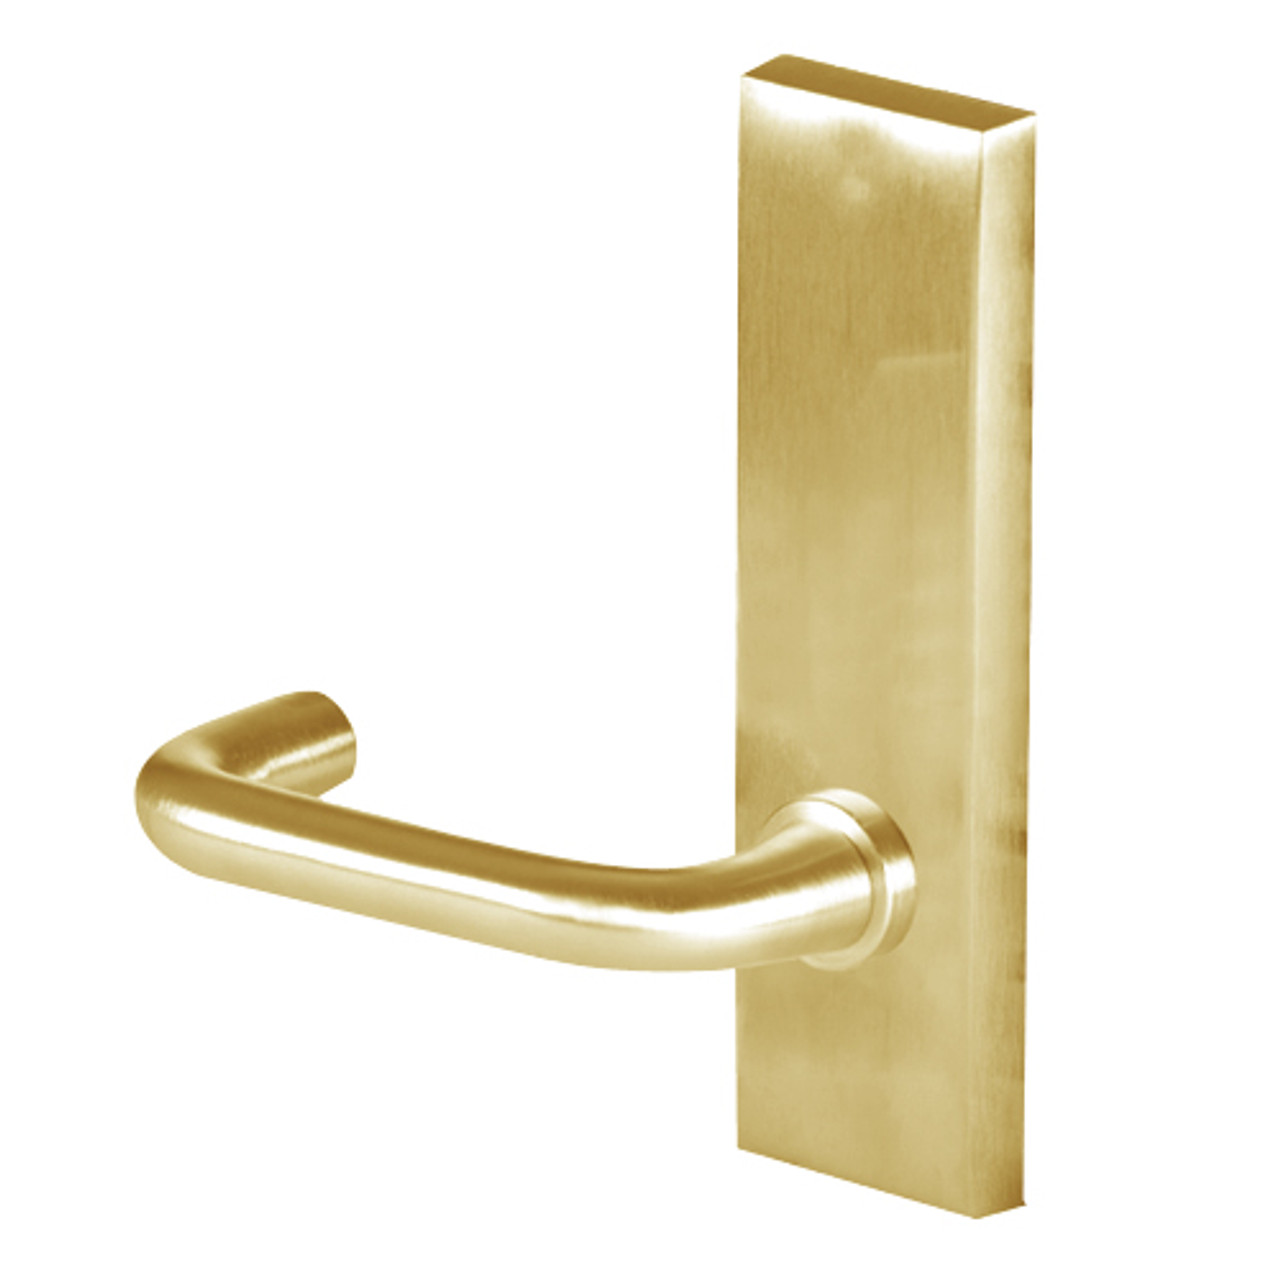 45H0N3M606 Best 40H Series Passage Heavy Duty Mortise Lever Lock with Solid Tube Return Style in Satin Brass